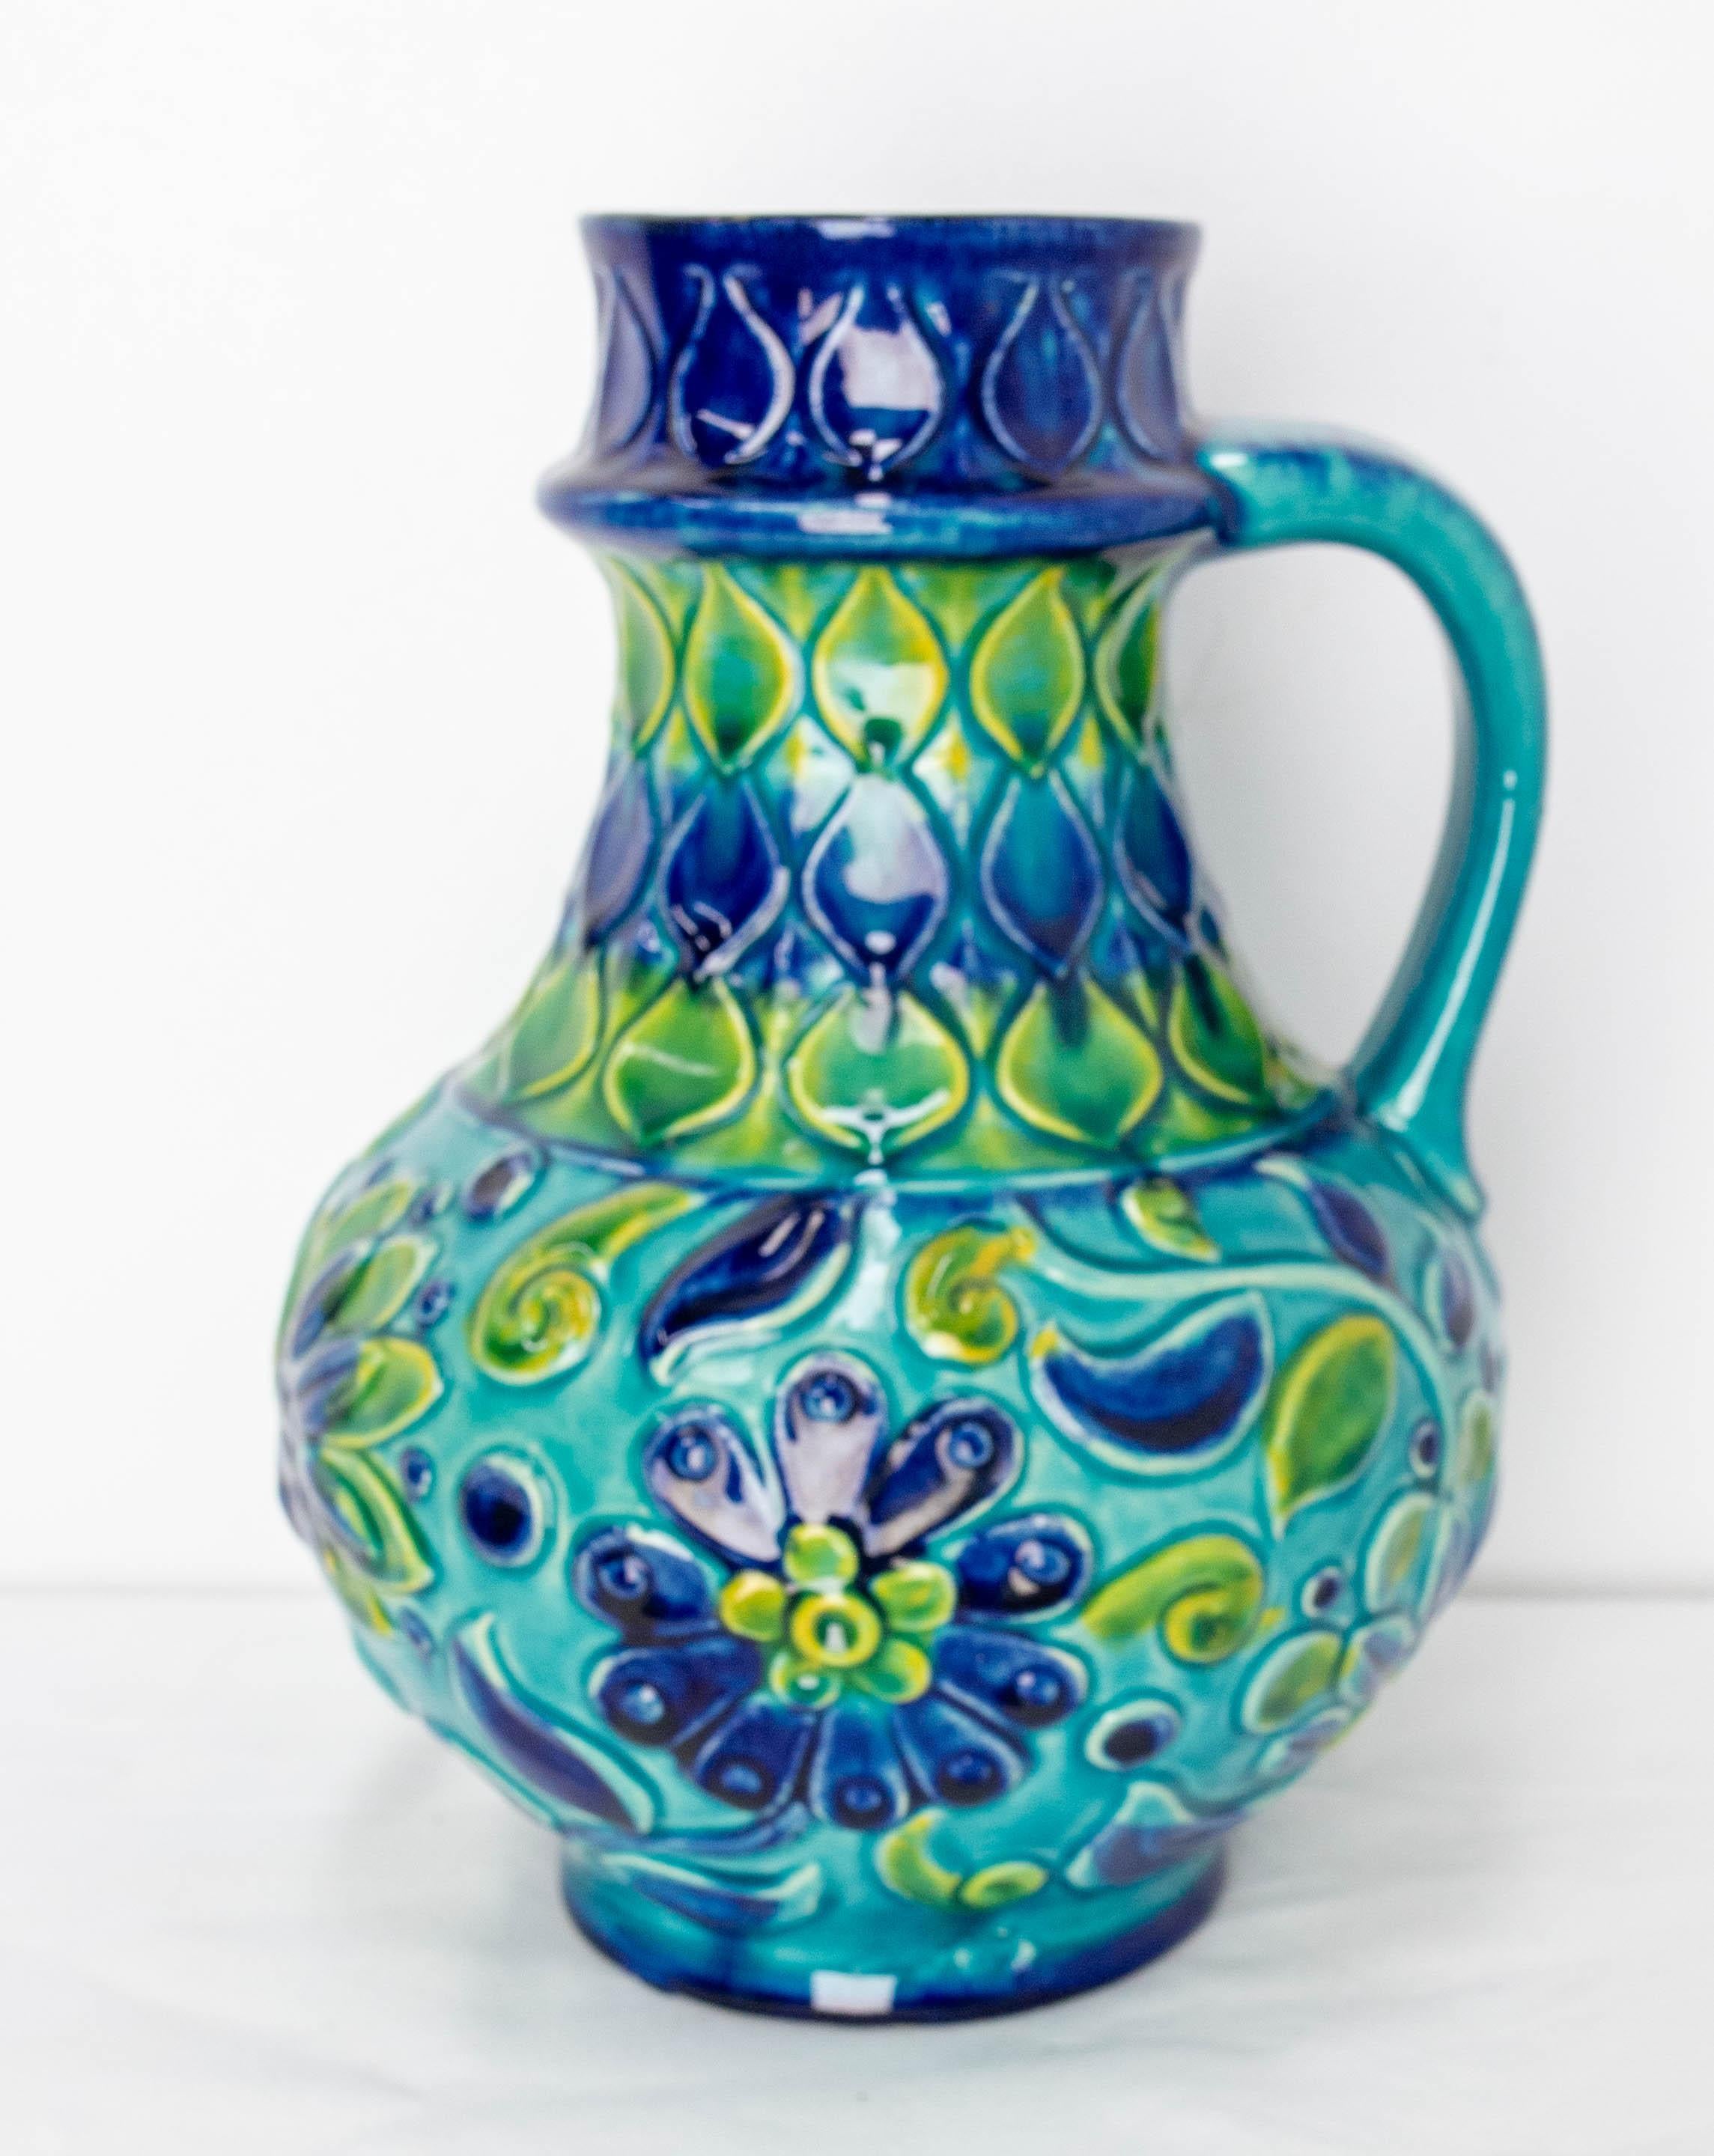 Blue and green pitcher in galzed ceramic from the factory Bay Keramik 8730 Model
Made circa 1950-1960
West-Germany, after the Second Word War, it took a few years to rebuild the German pottery industry. At its height, from the 1950s to the 1970s,